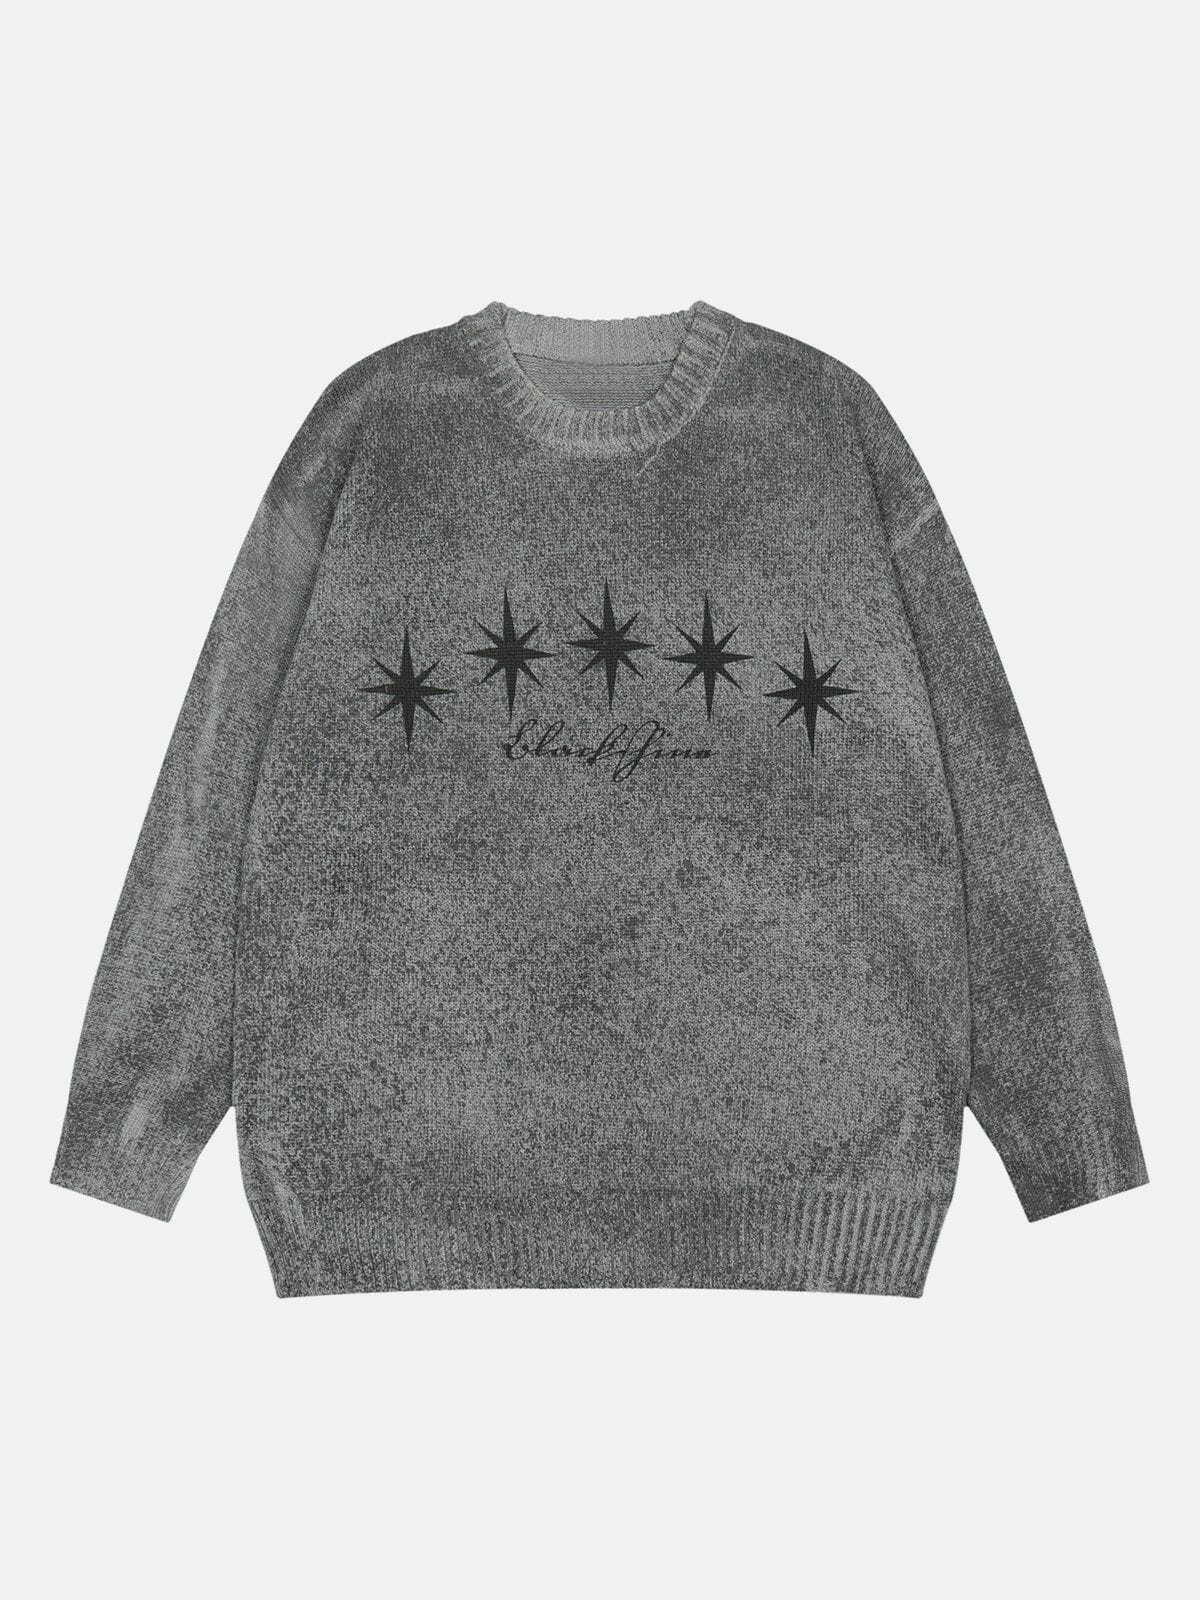 sepia star sweater vintage chic & edgy vibe 5847